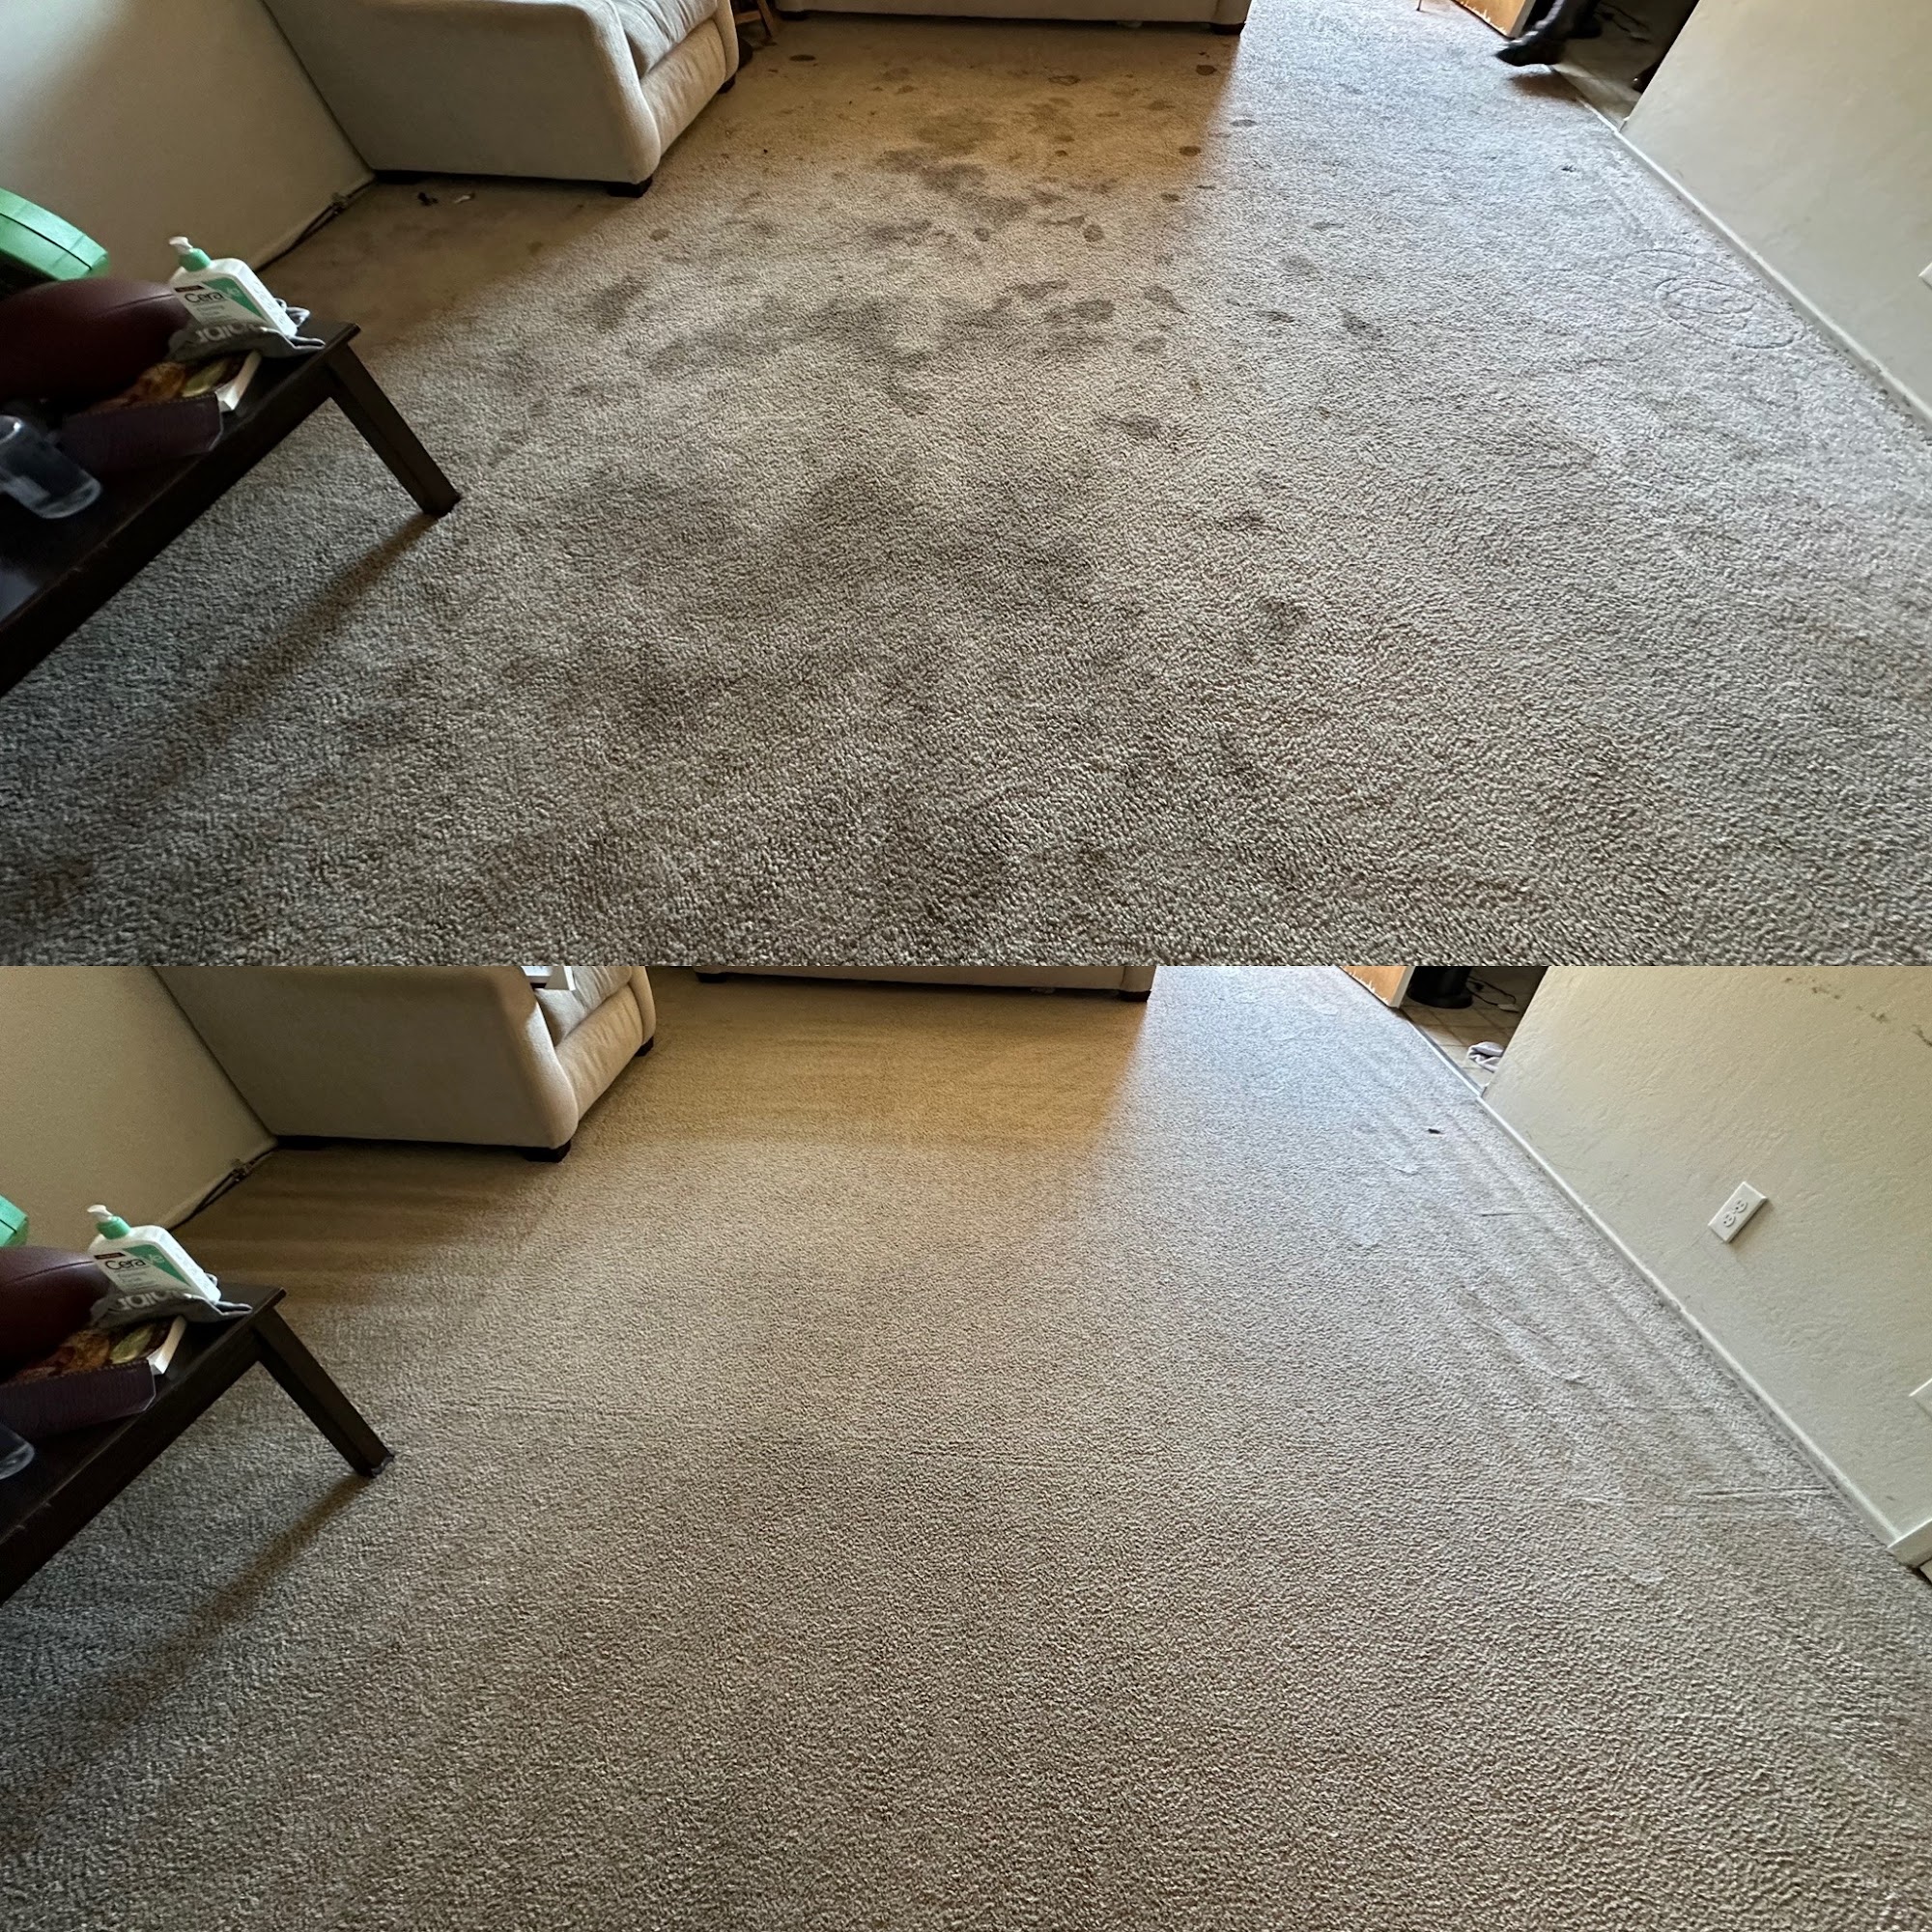 Carpet Cleaner Lewis Cleaners South